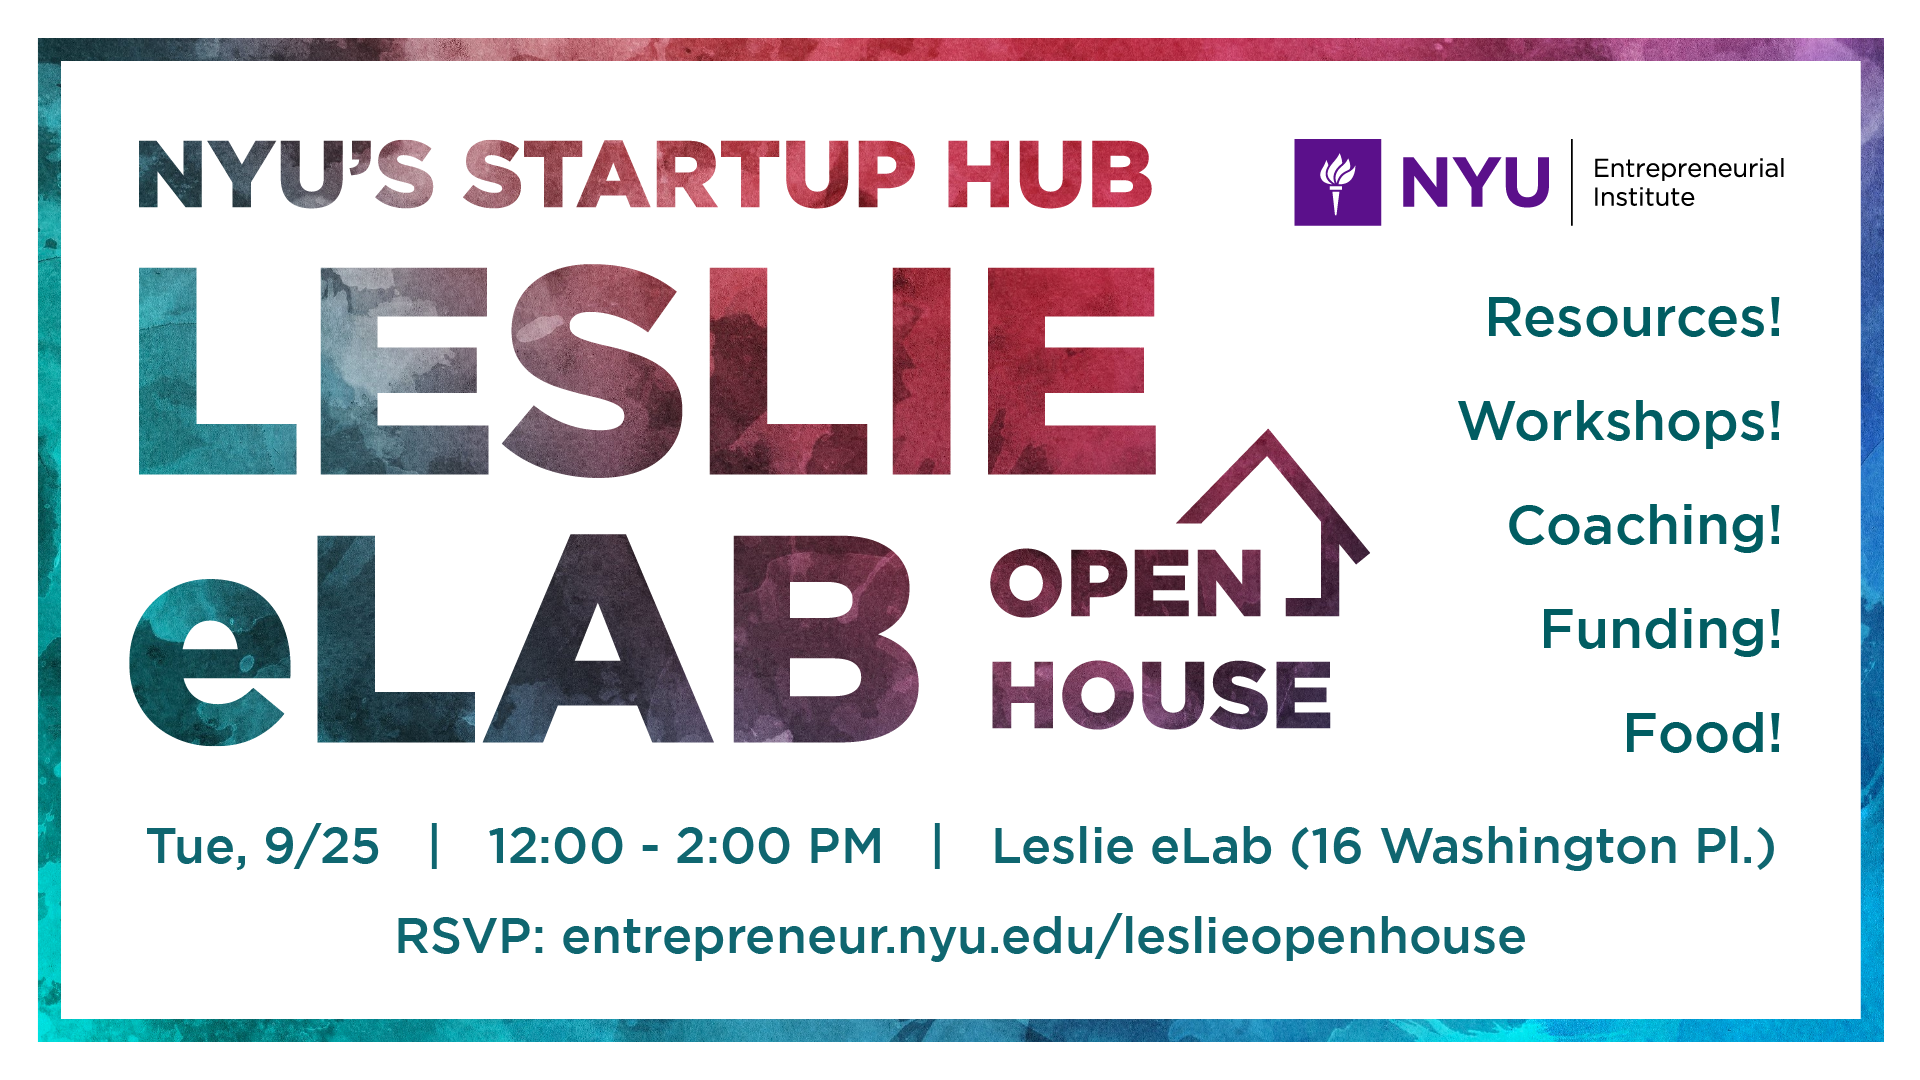 Join the NYU Entrepreneurial Institute for an NYU Demo Day and Open